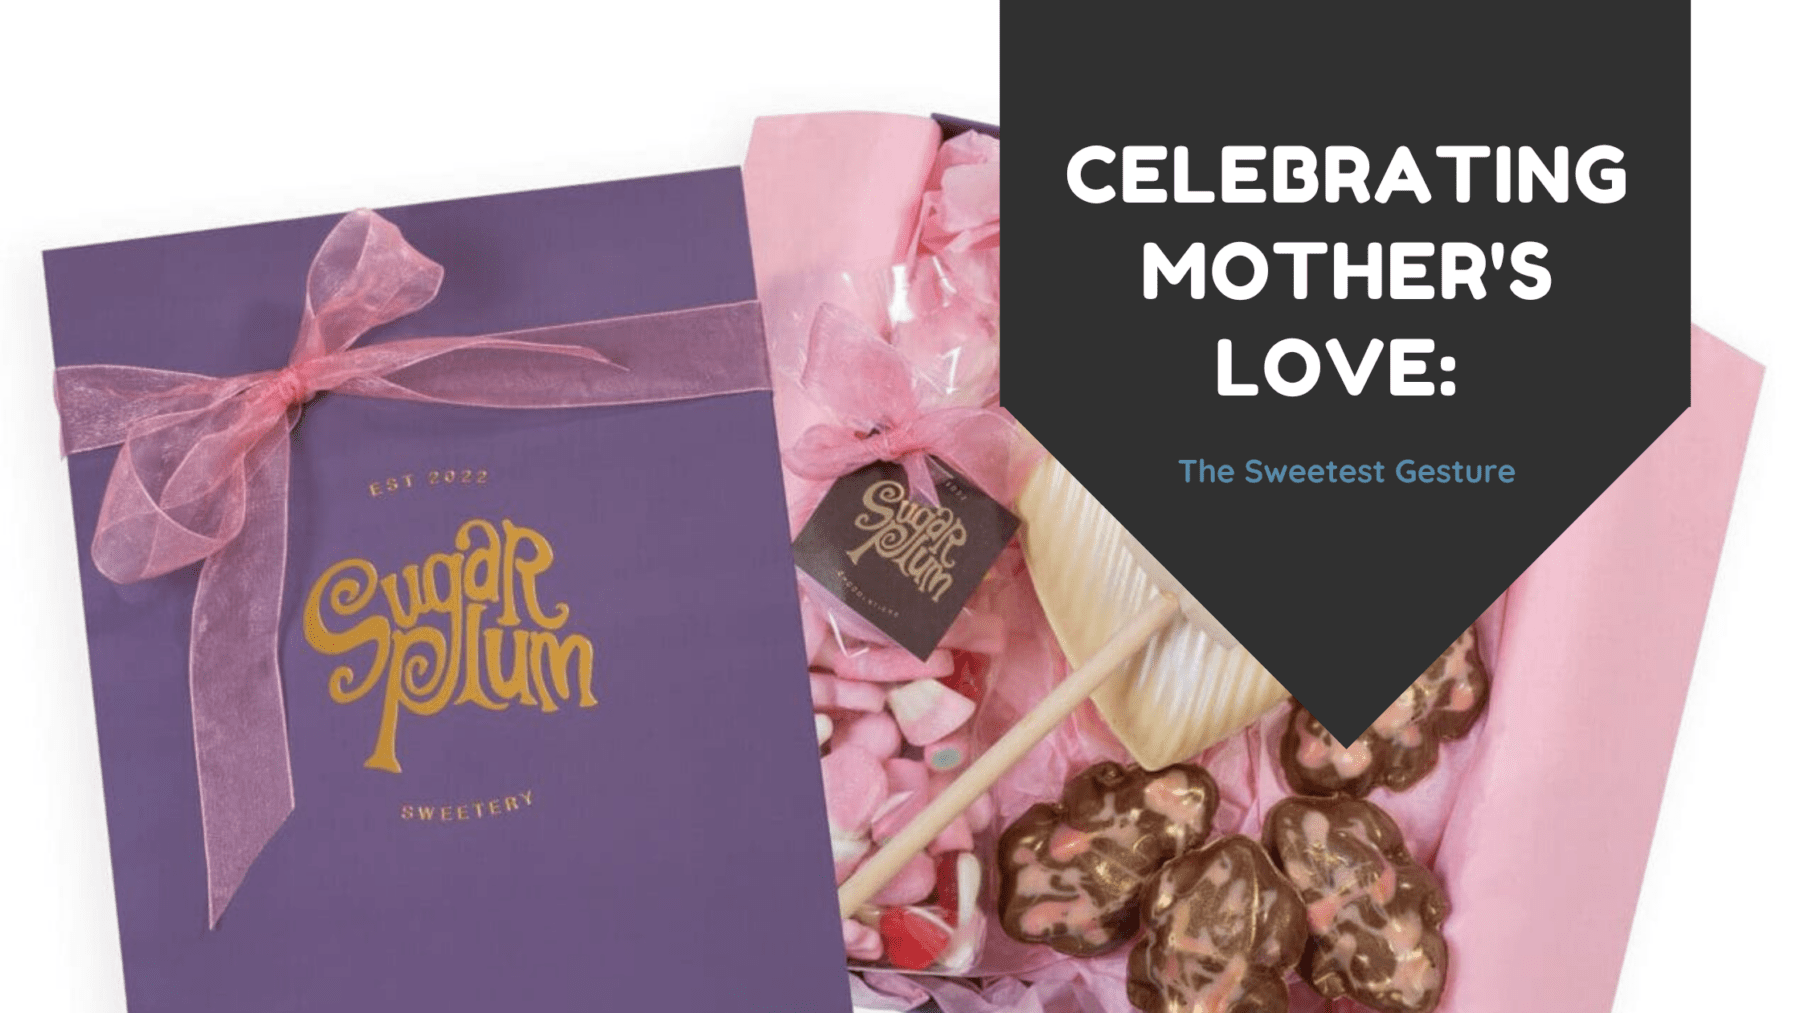 Mother's Day Special - Handcrafted Chocolates and Sweets from Sugar Plum Sweetery, perfect for gifting.